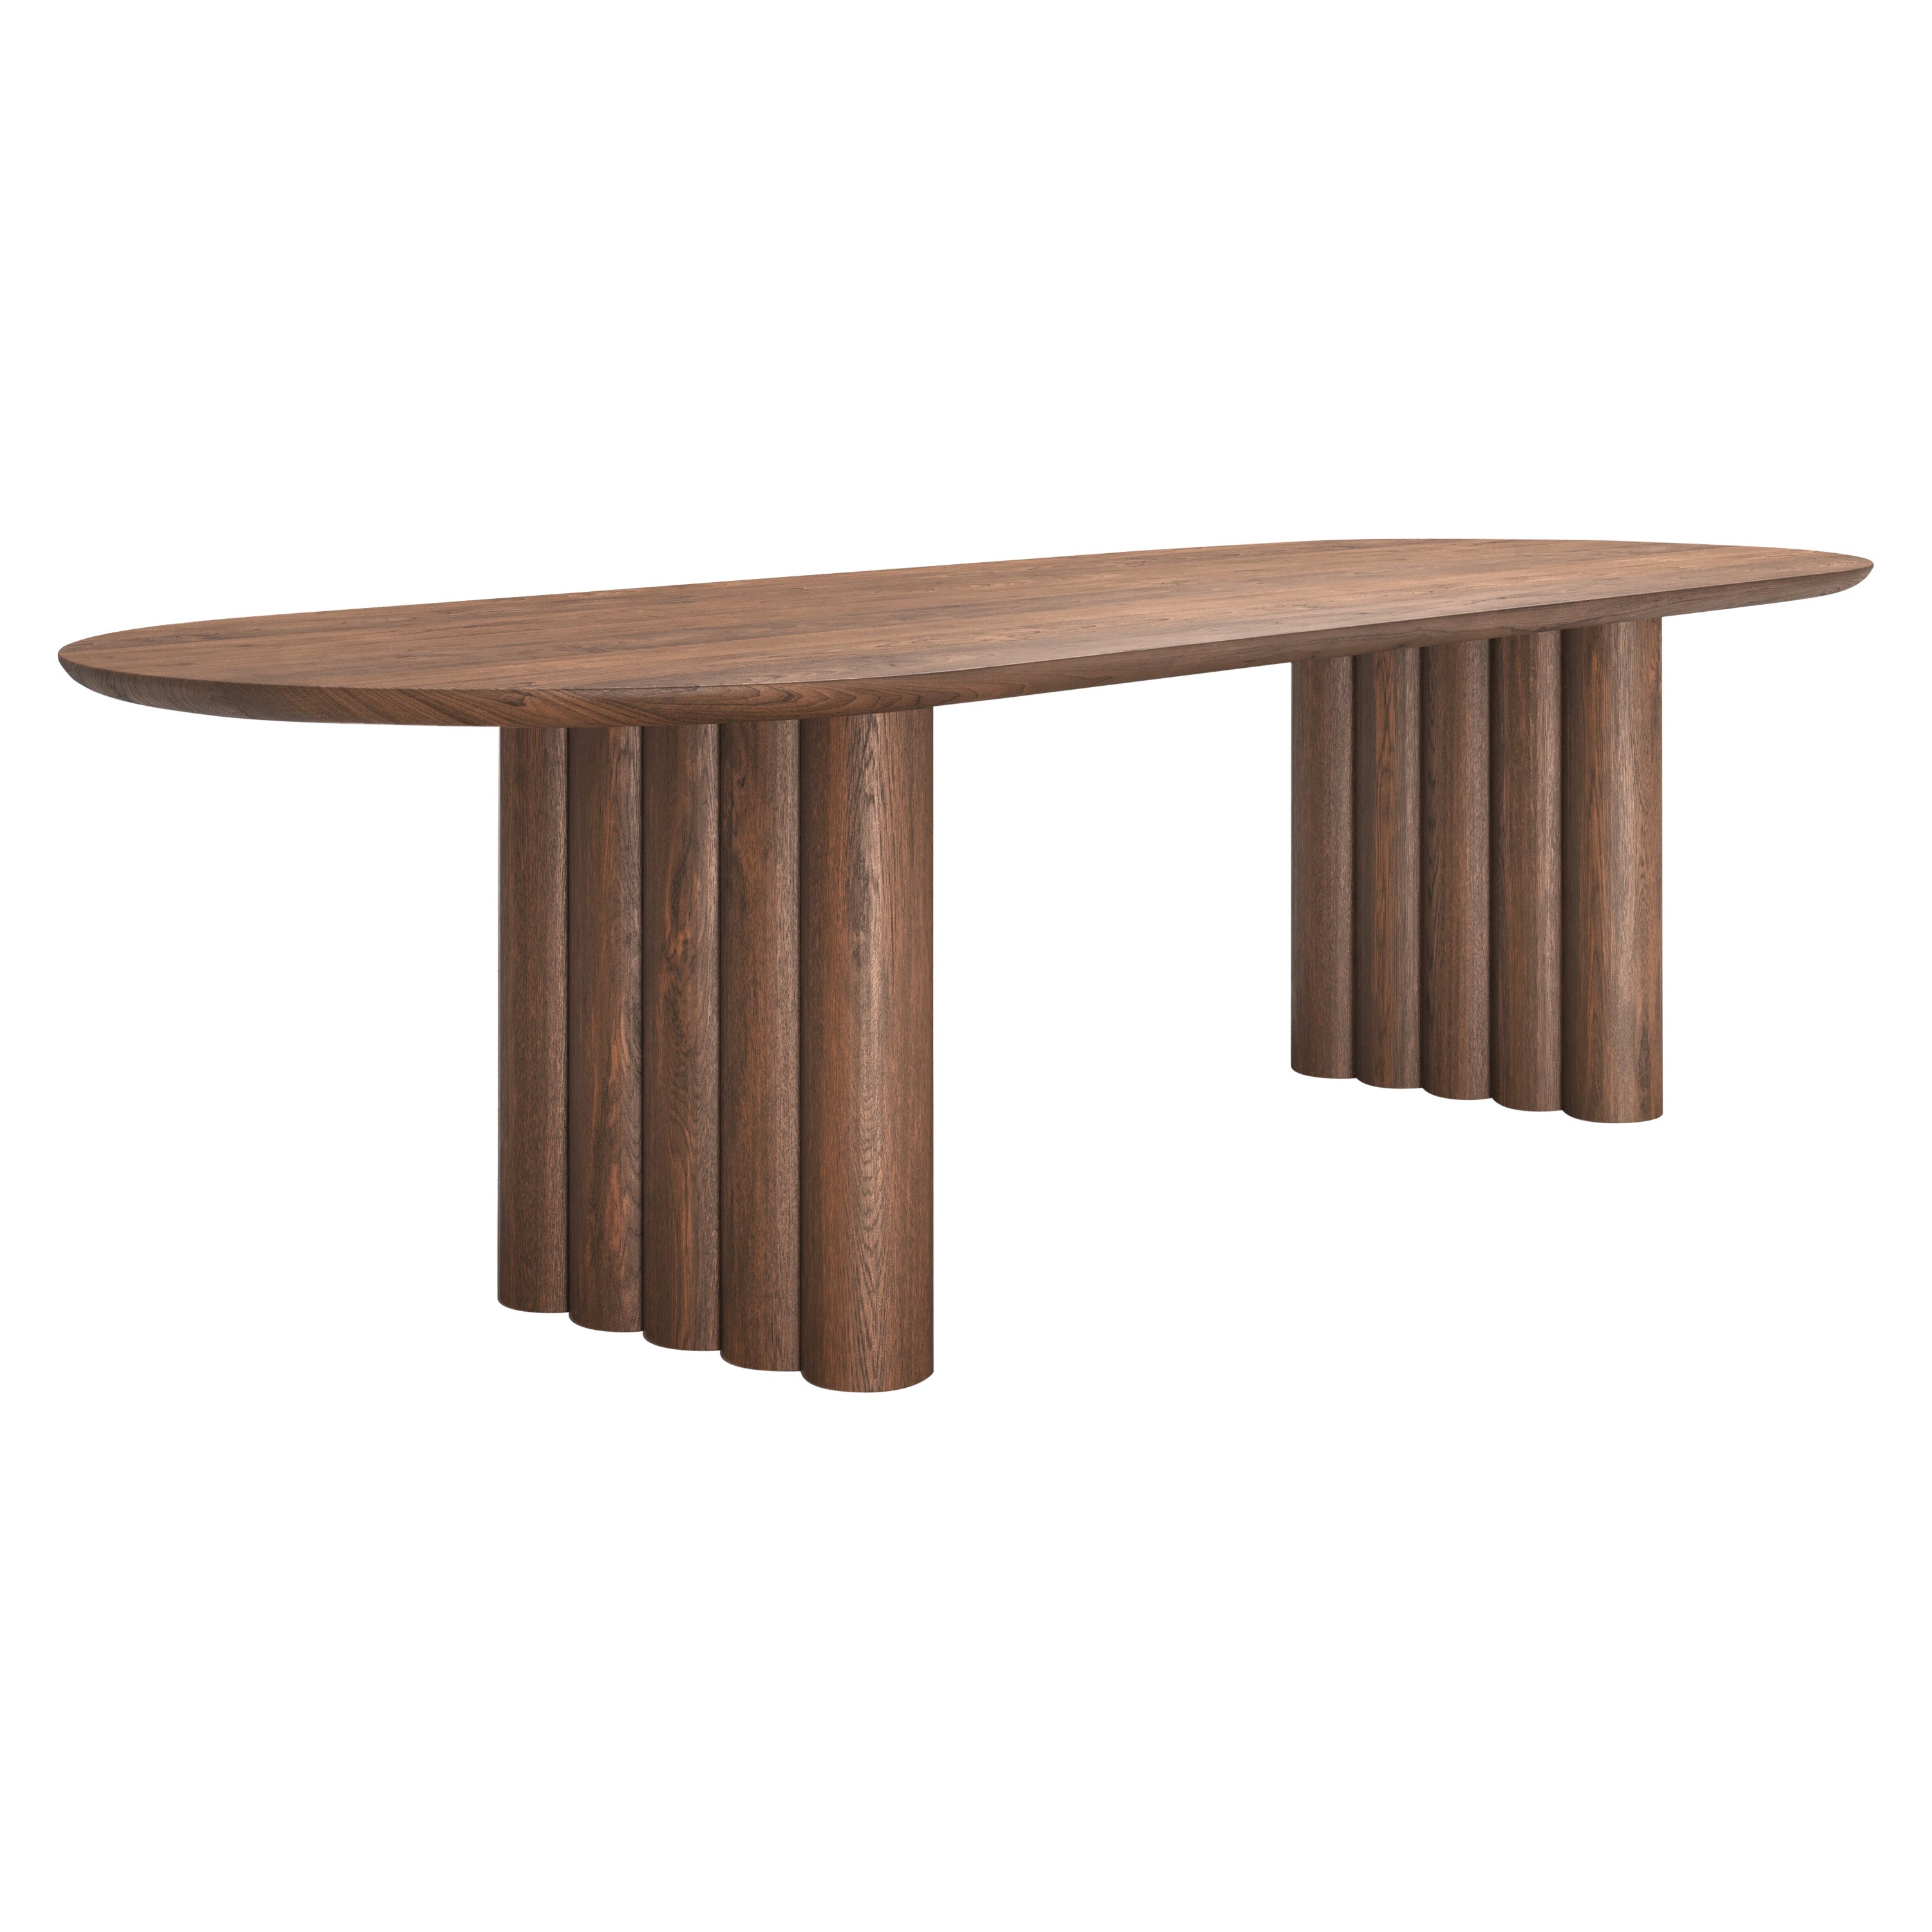 Contemporary Dining Table 'Plush' by Dk3, Smoked Oak or Walnut, 400